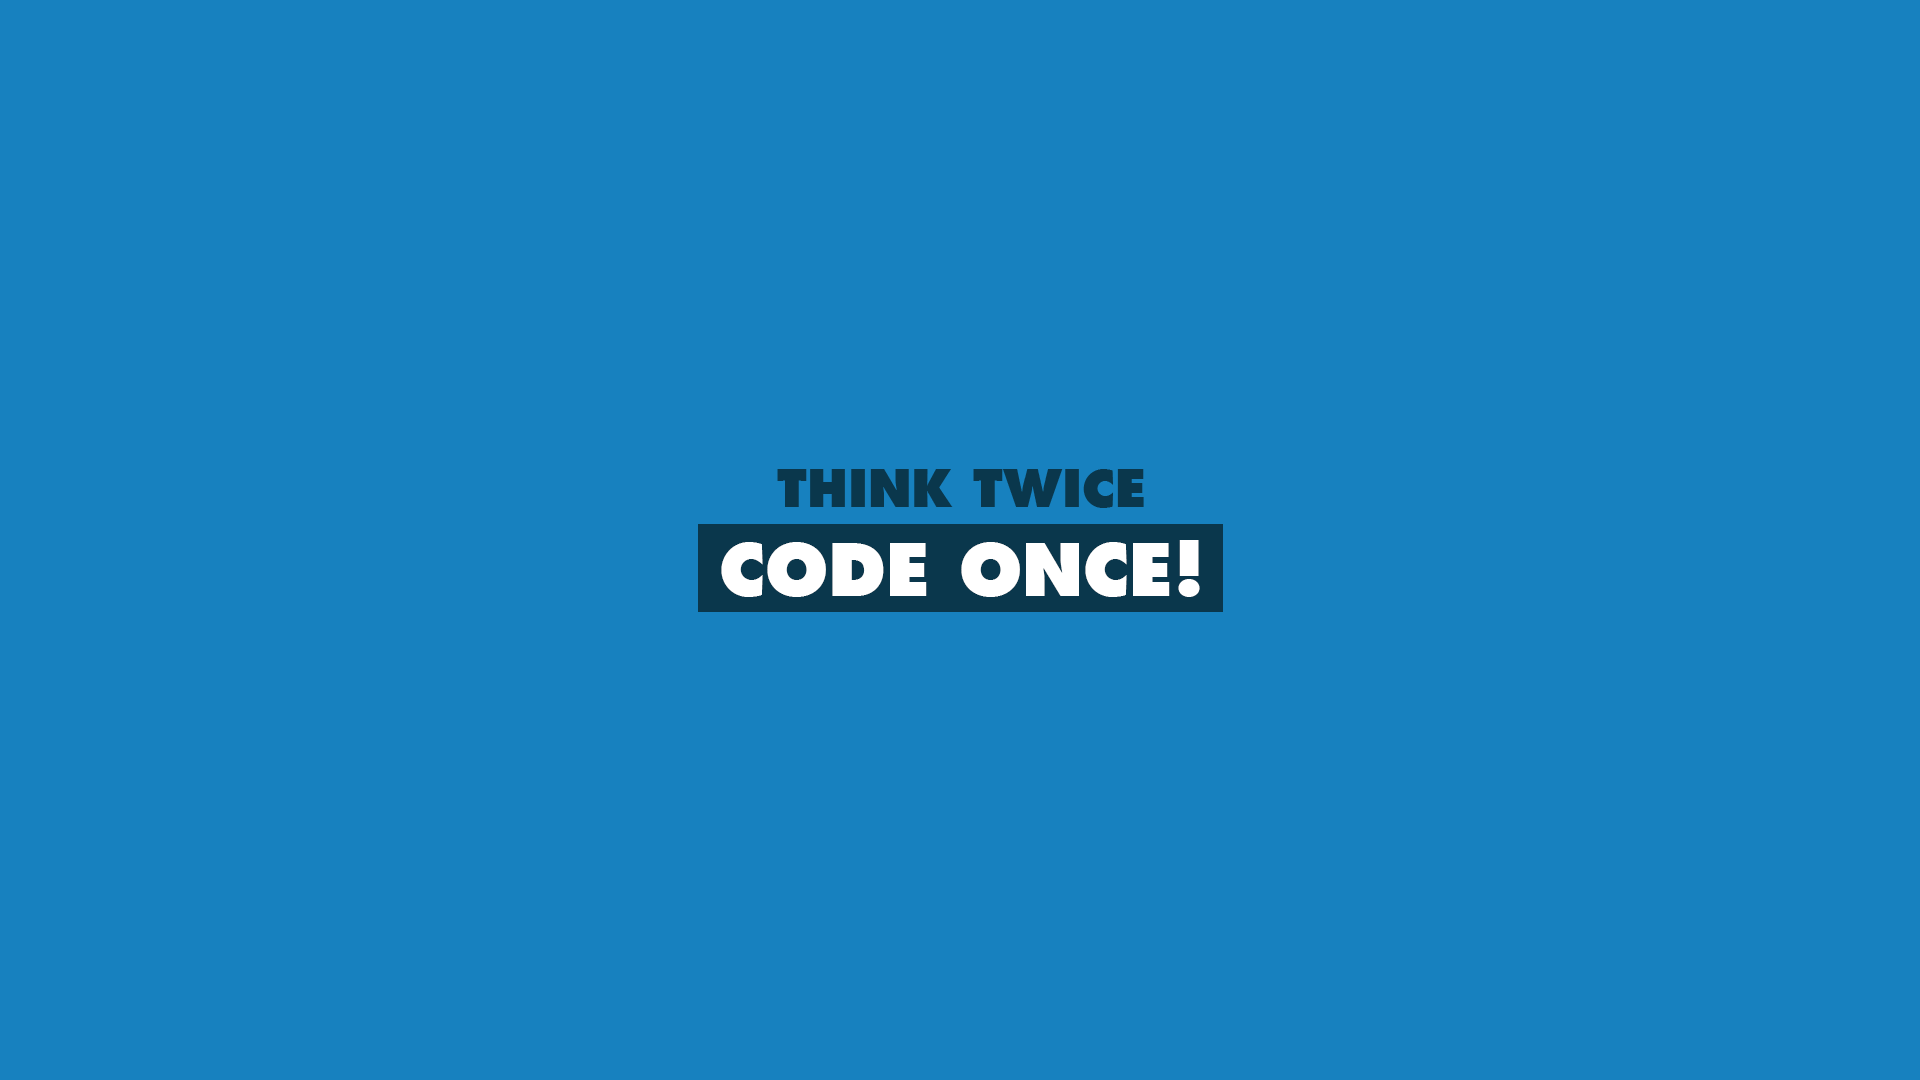 HD desktop wallpaper featuring a bold blue background with the phrase THINK TWICE CODE ONCE! in white text, emphasizing programming and technology.